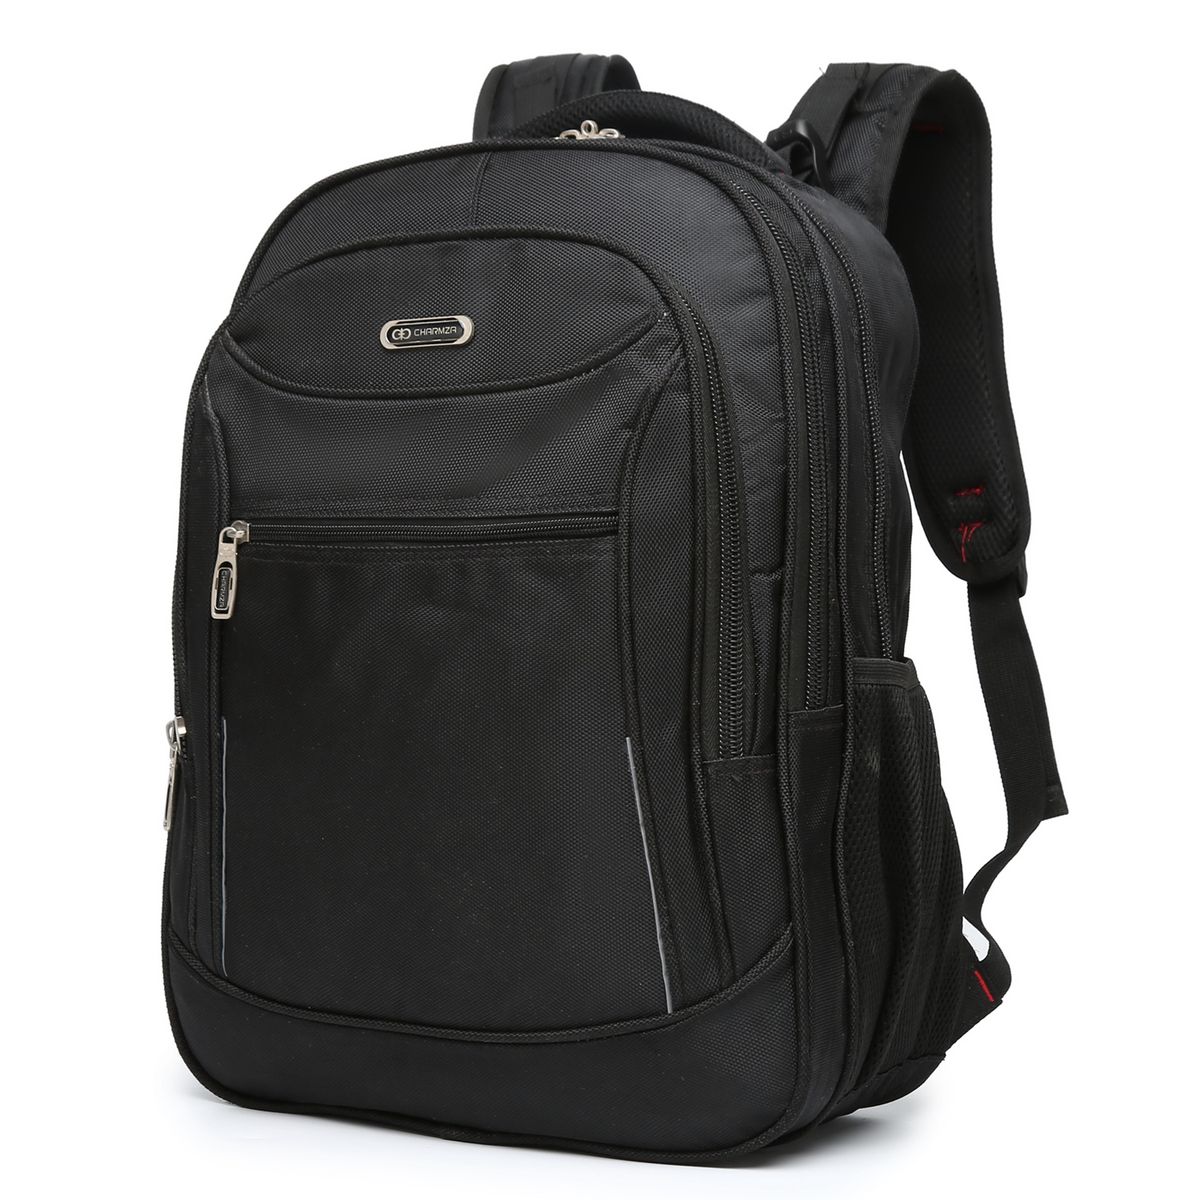 Charmza Anzi Laptop Backpack | Buy Online in South Africa | takealot.com